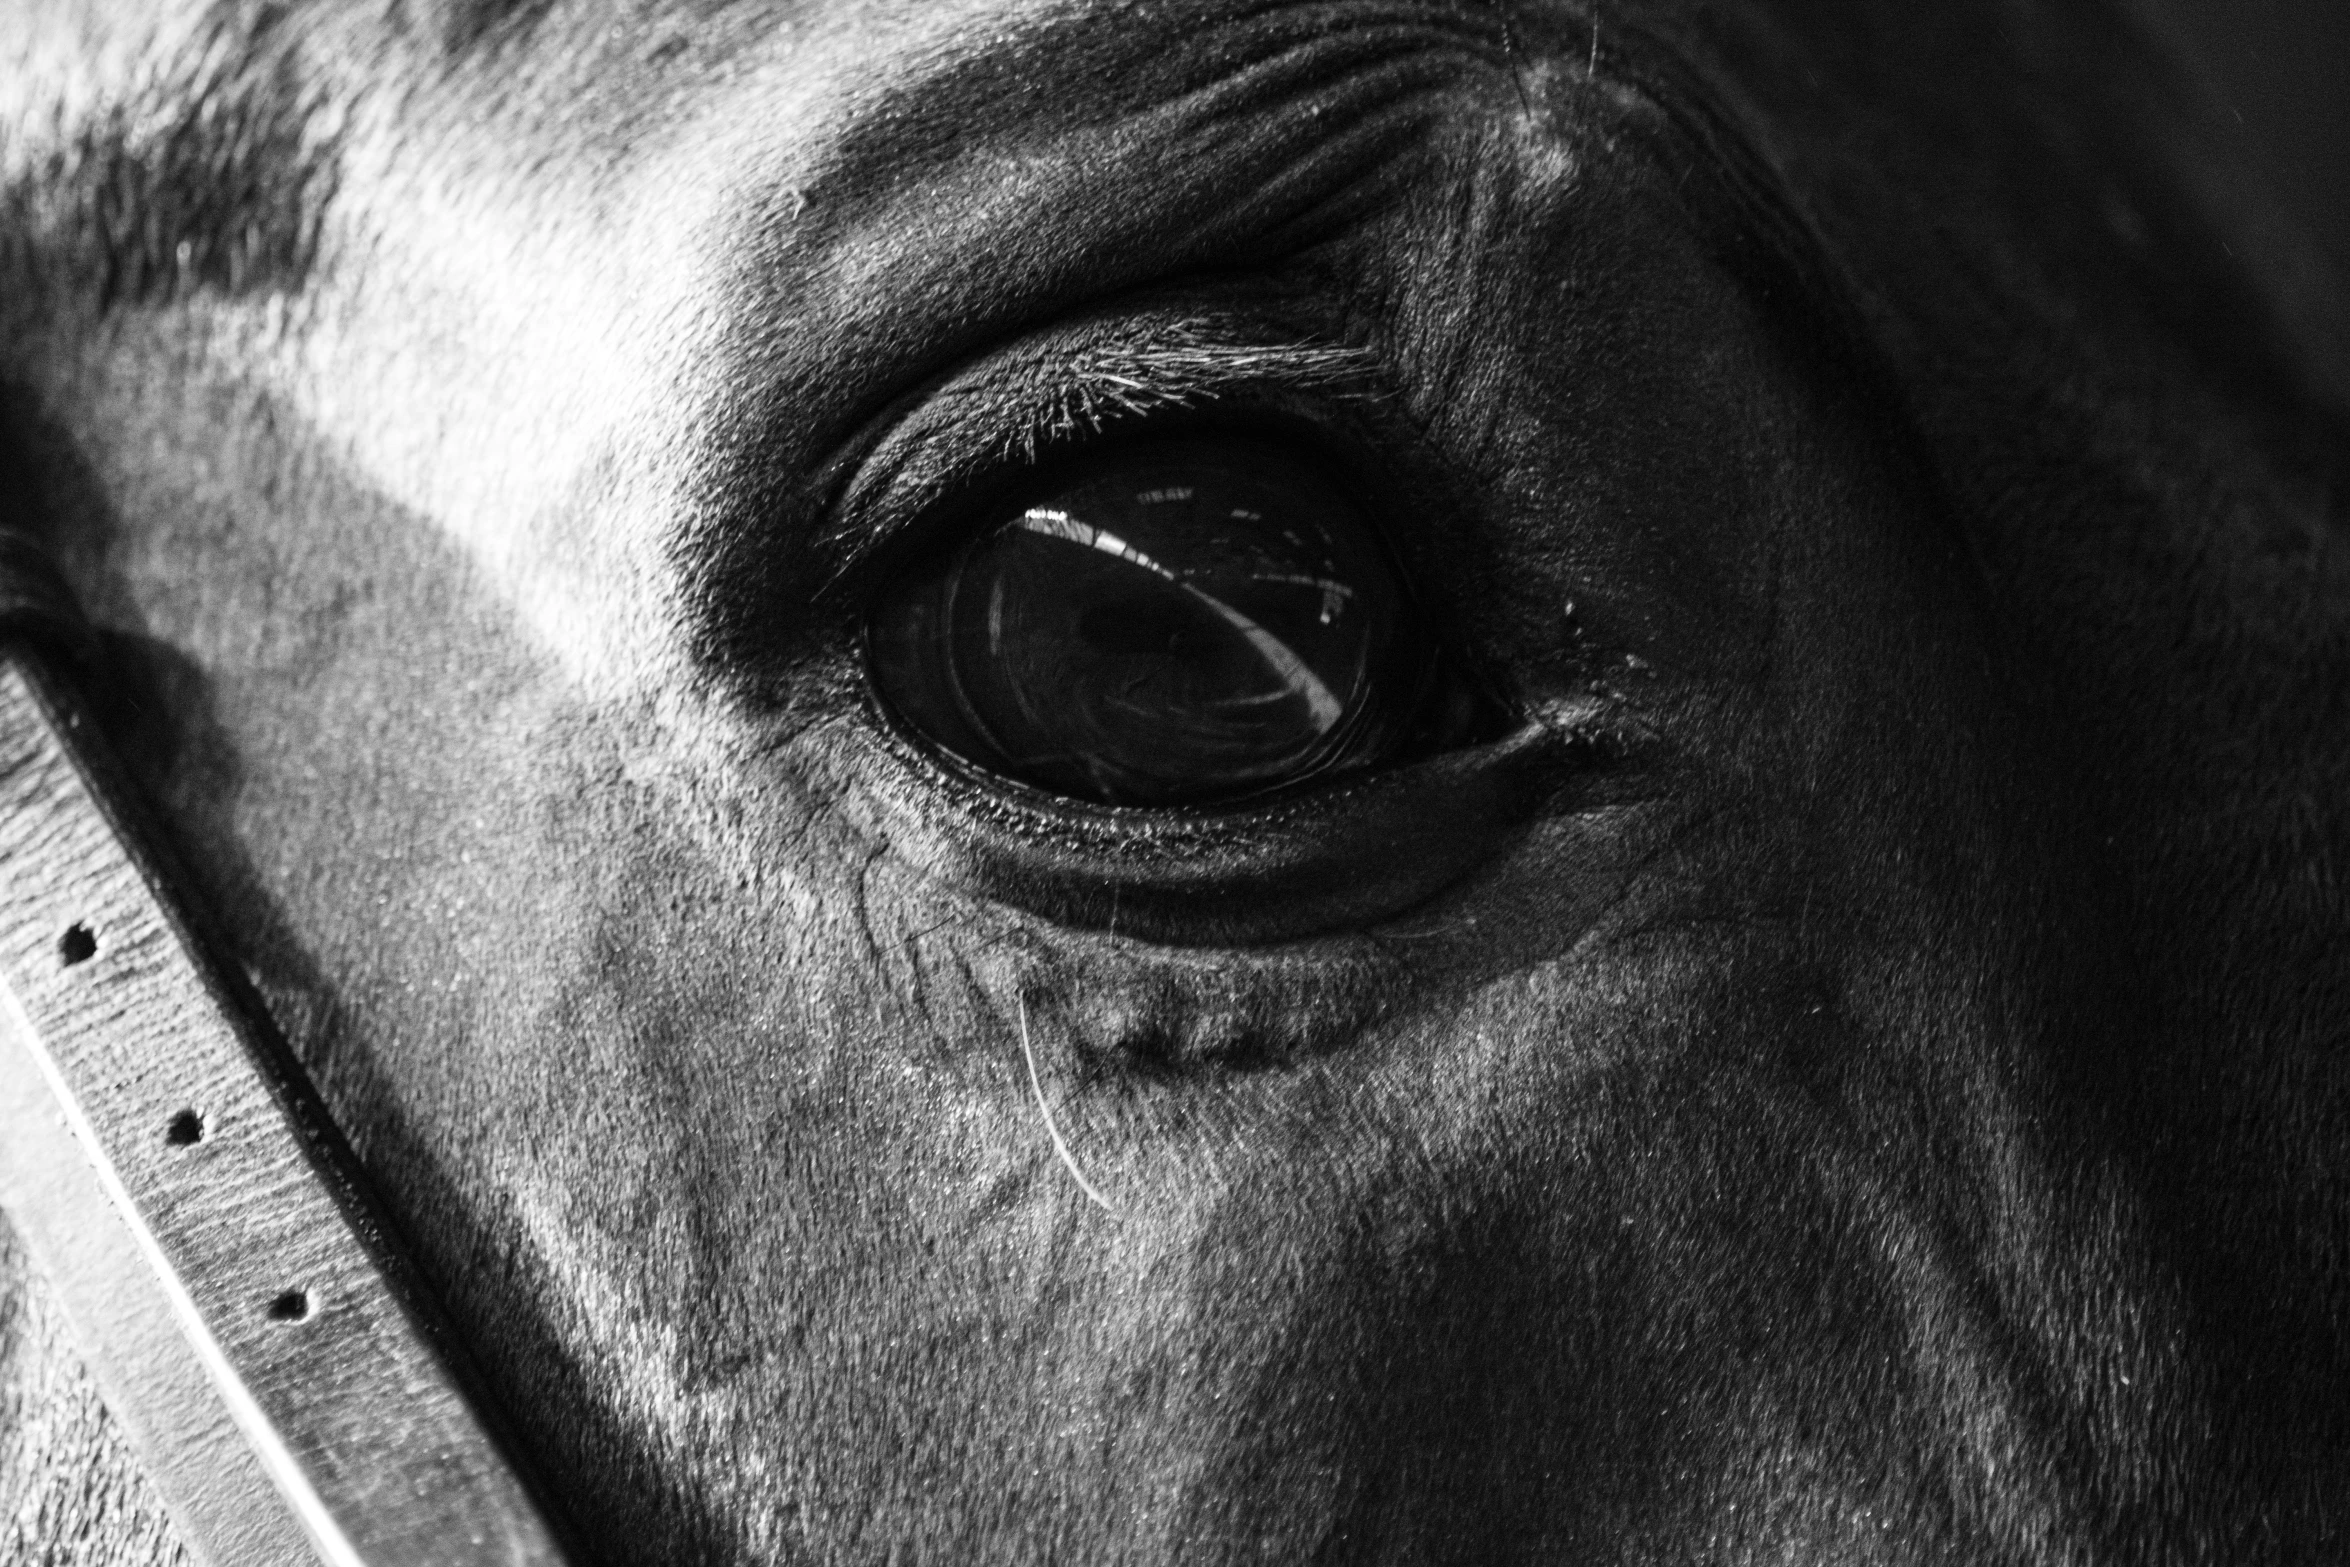 close up of a horse's eye showing its distinctive pattern